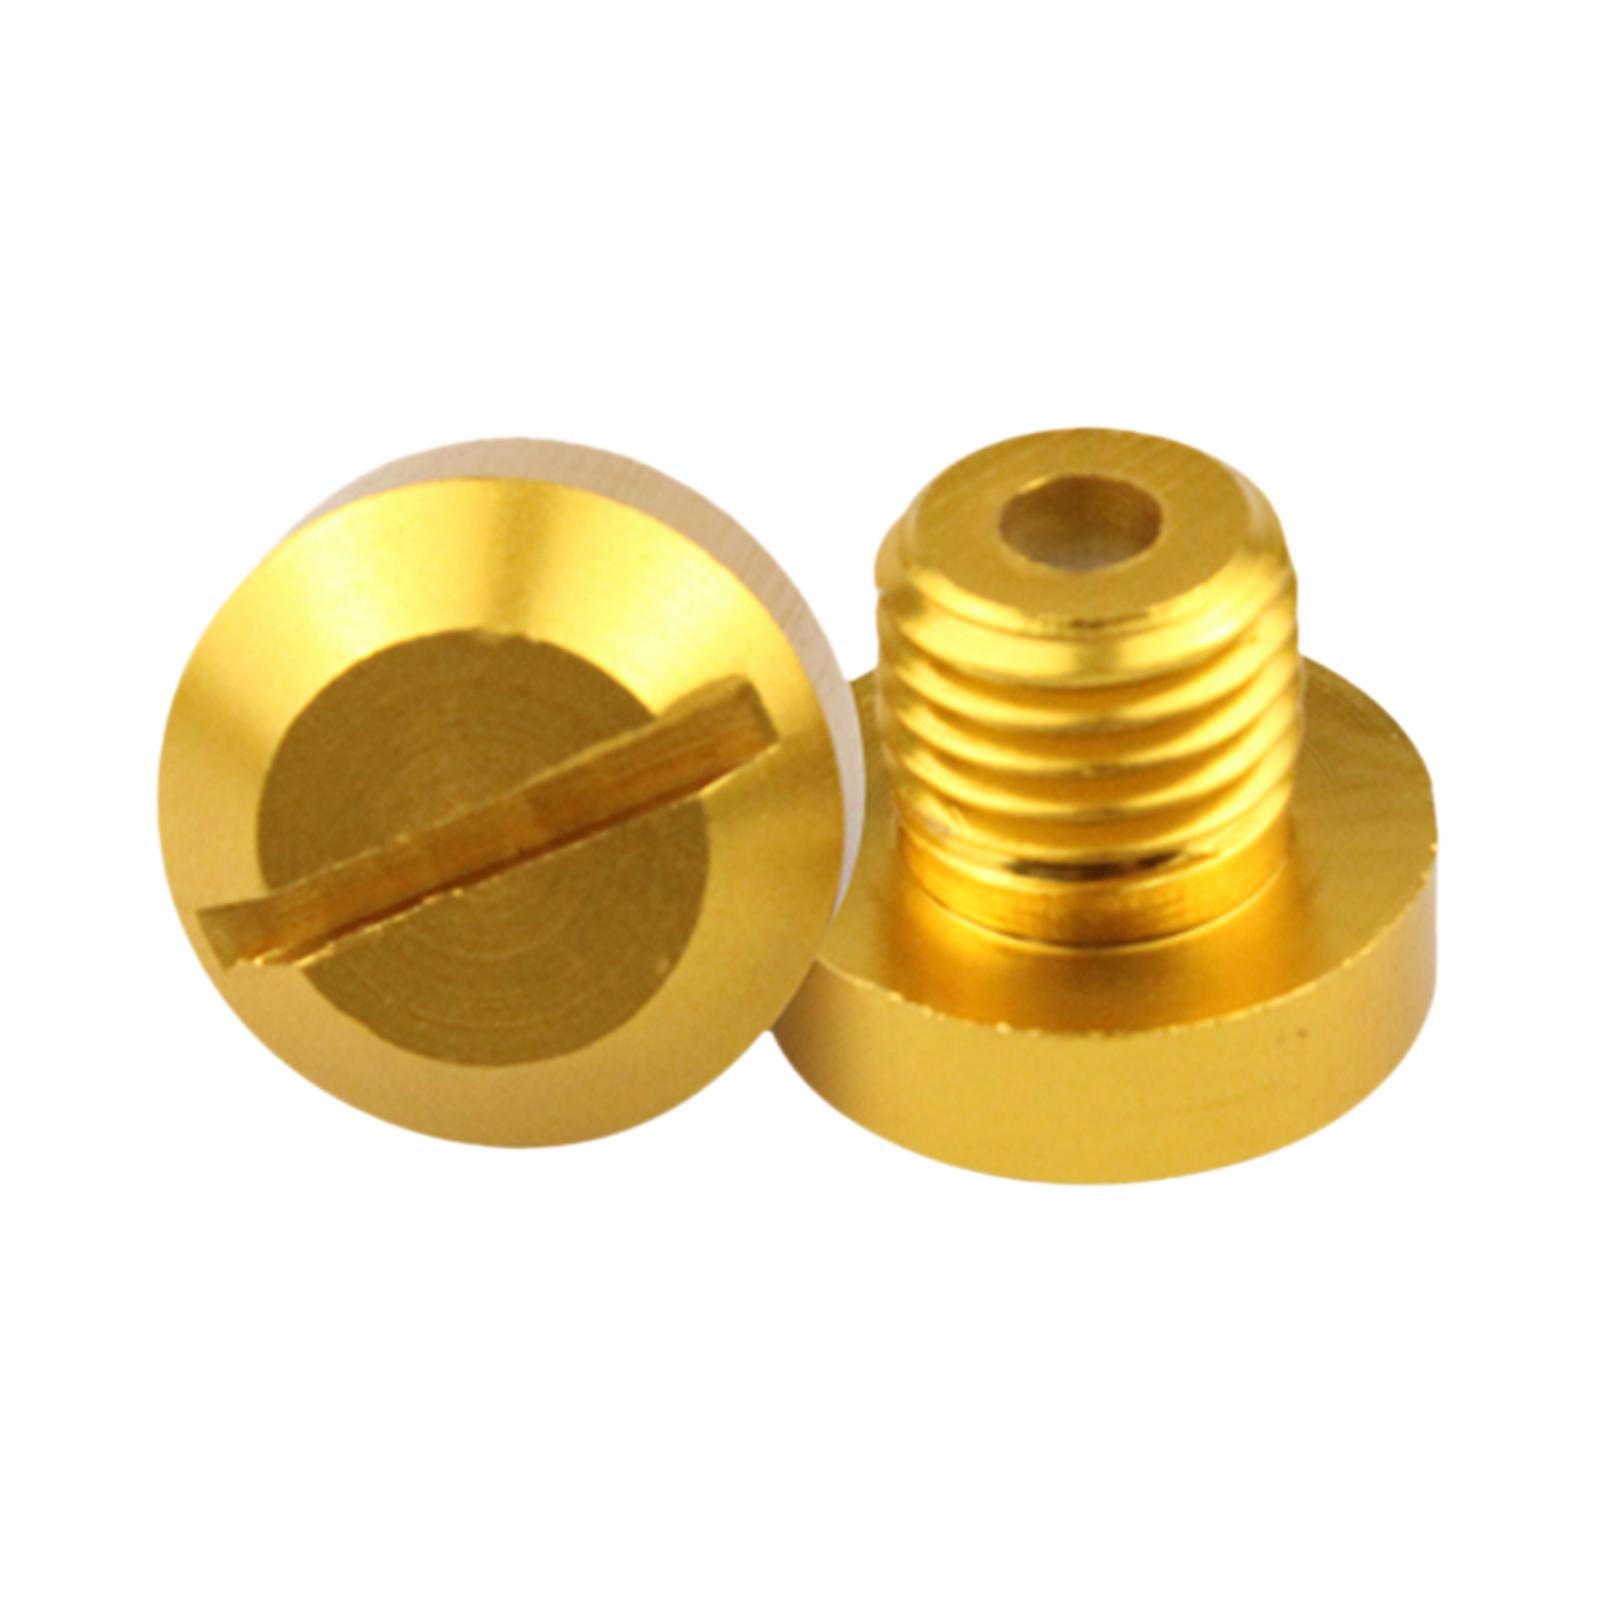 2 Pcs M10x1.25 Rearview Mirrors Thread Hole Plug Screw Bolts Gold Positive